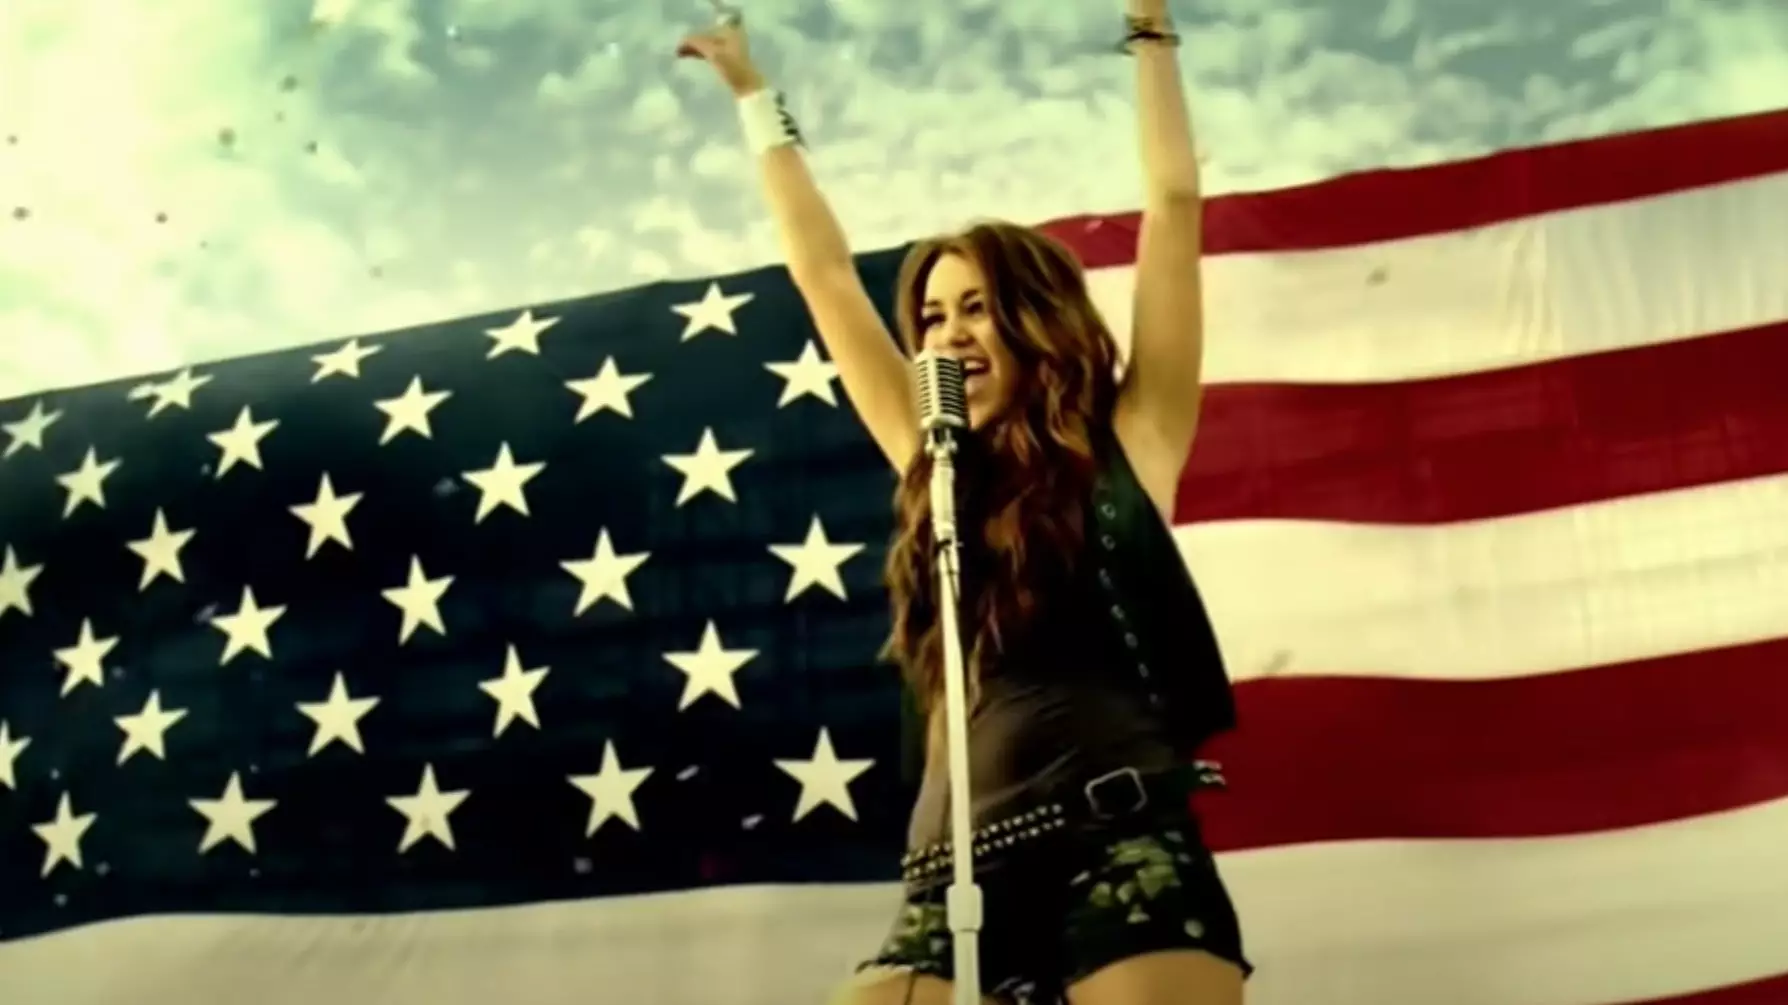 Miley Cyrus’ ‘Party In The USA’ And *NSYNC’s ‘Bye, Bye, Bye’ Return To The Charts After Joe Biden’s Win